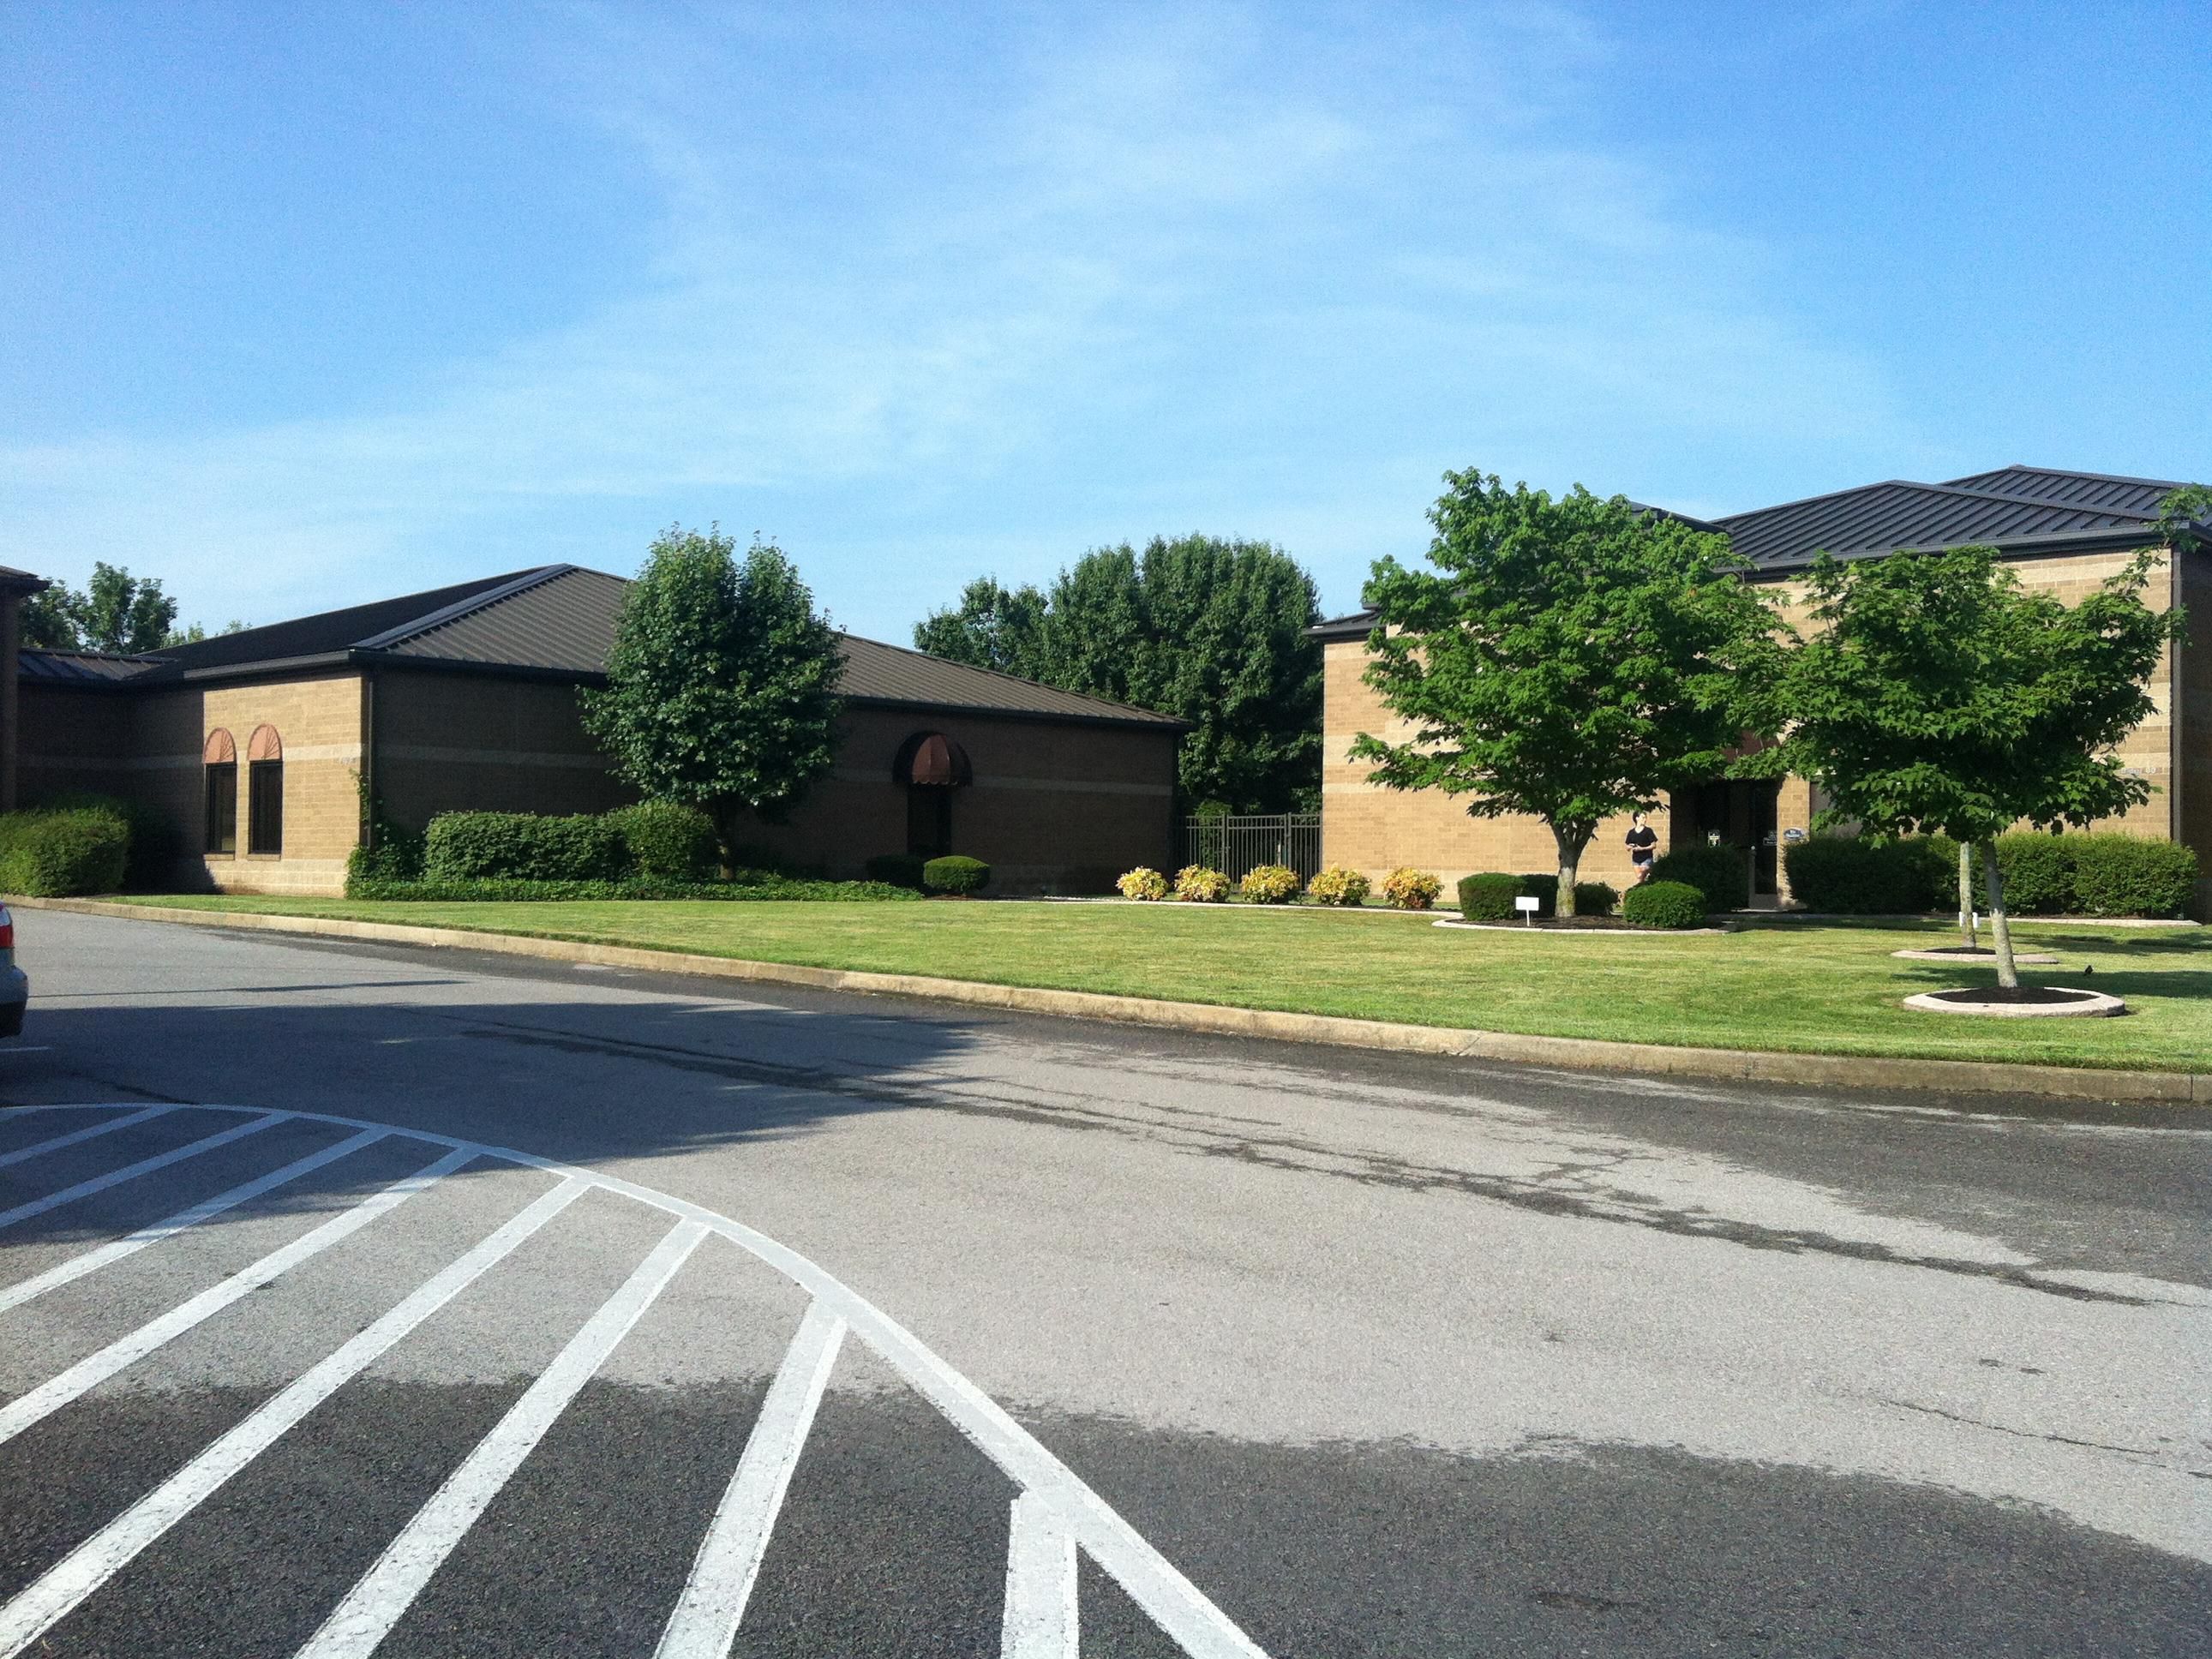 Holiday Inn Express Turner Guesthouse at Fort Campbell, Kentucky